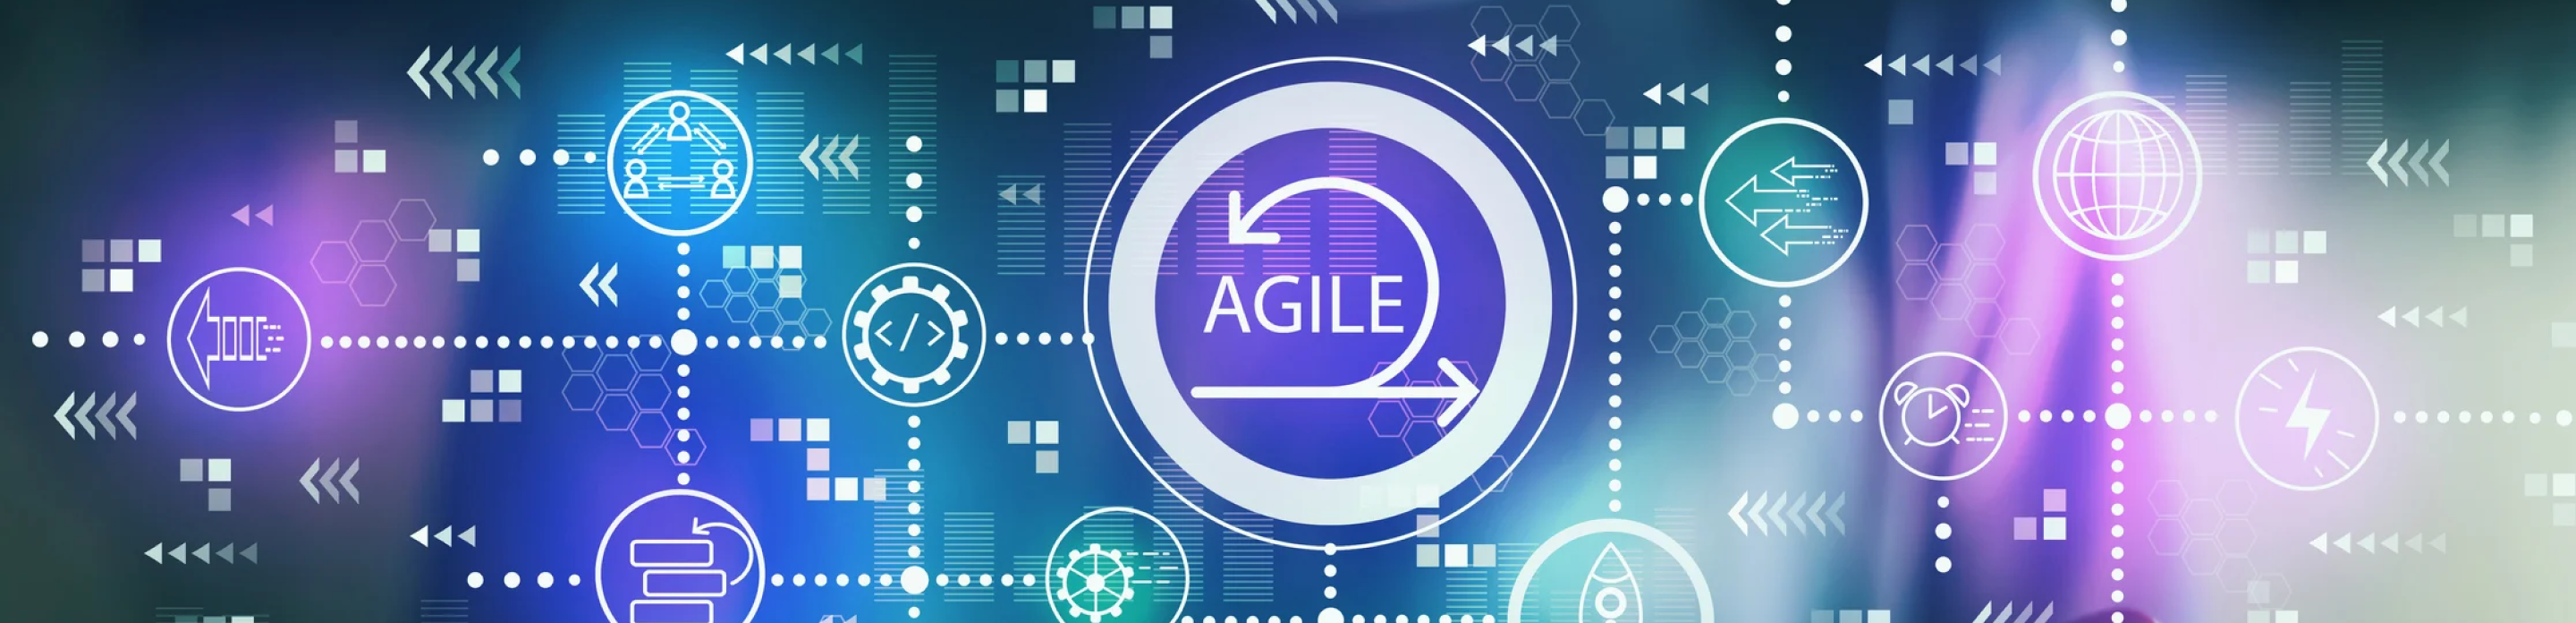 Agile Software Development in Healthcare Featured Image